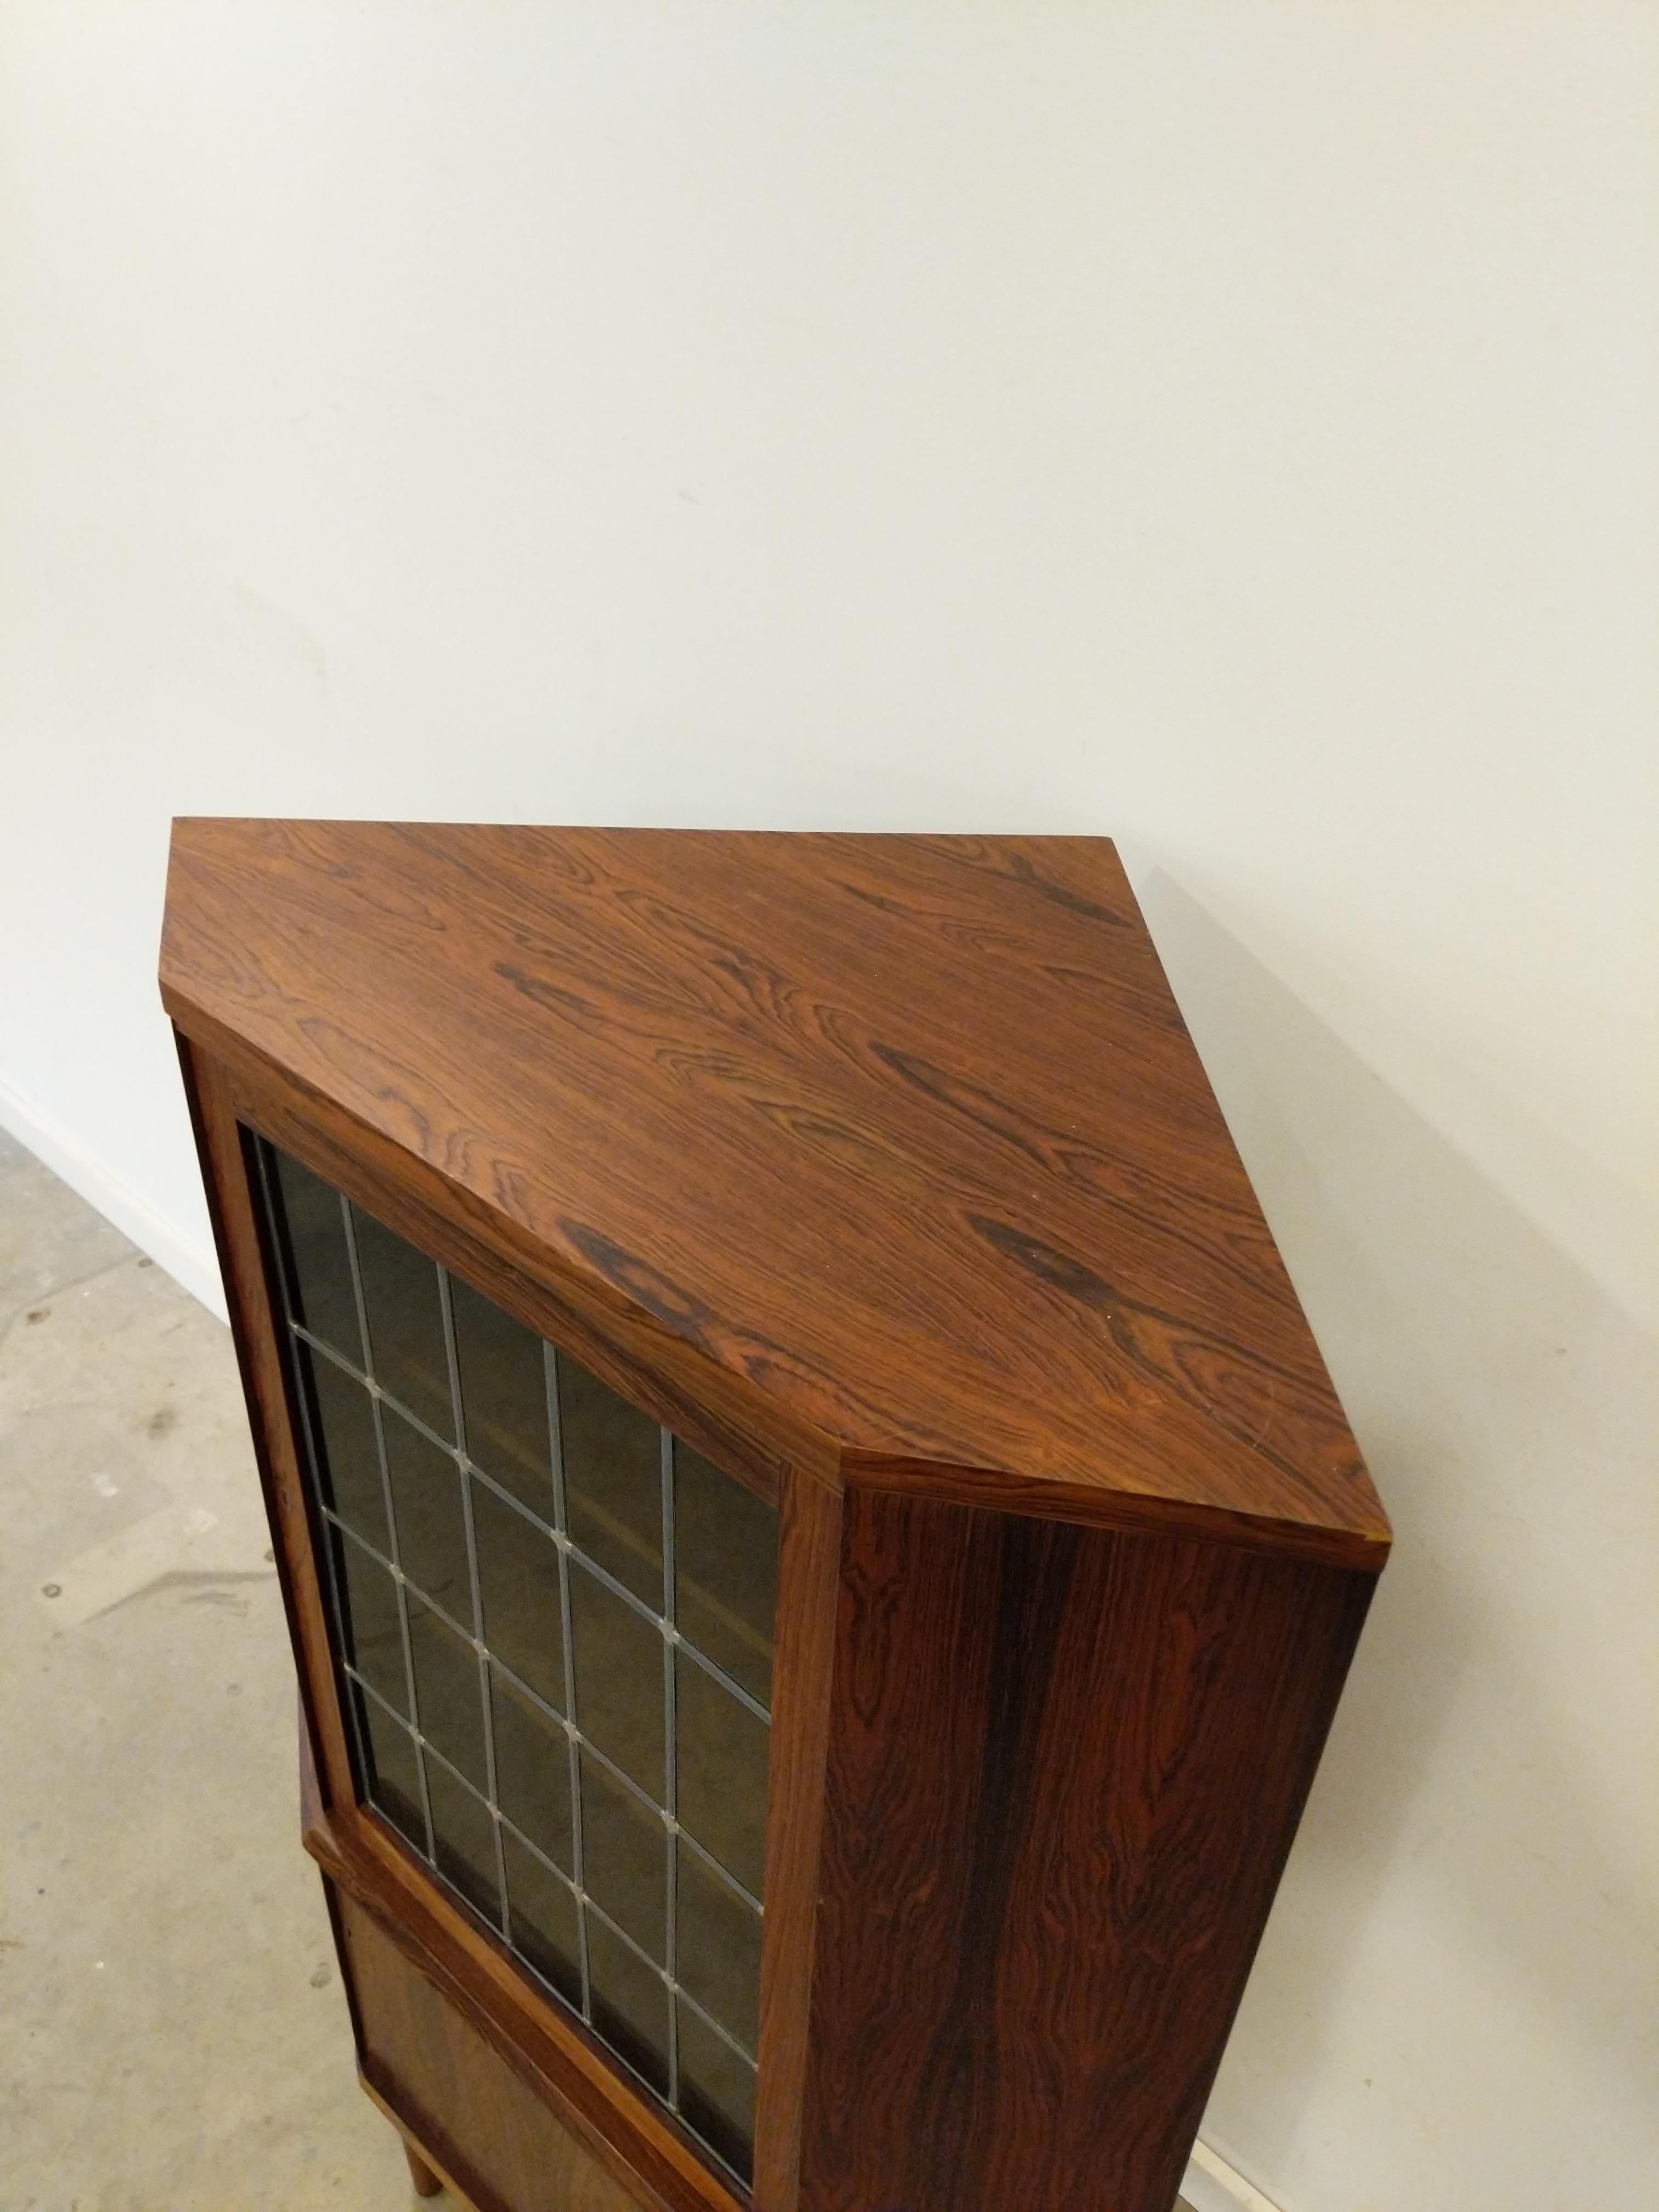 Vintage Danish Mid Century Modern Rosewood Corner Cabinet In Good Condition For Sale In Gardiner, NY